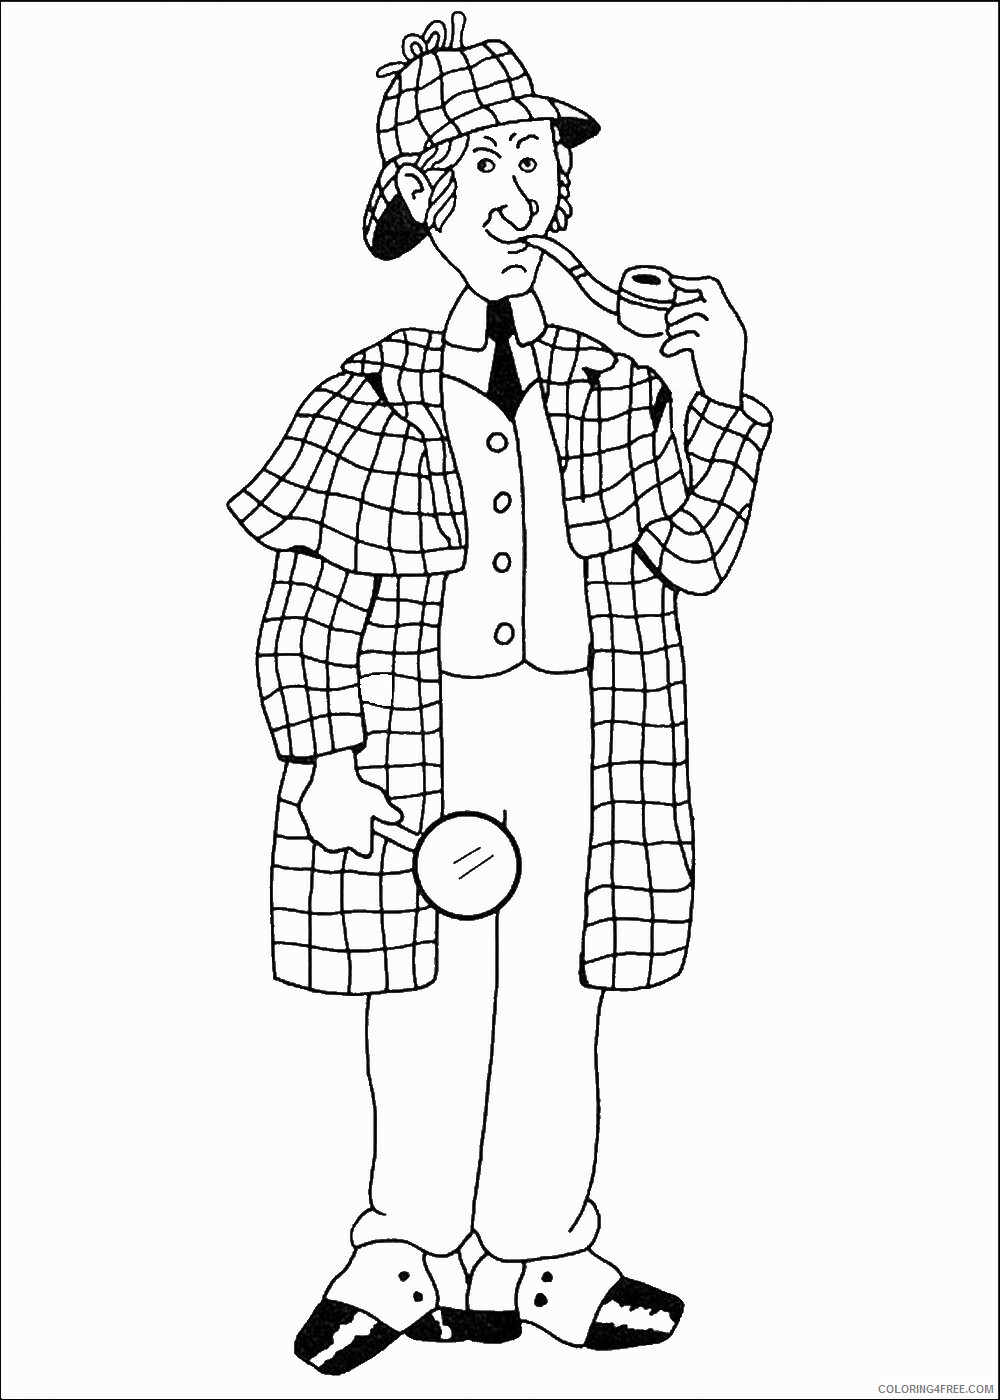 Spy Coloring Pages for boys spy_08 Printable 2020 0940 Coloring4free